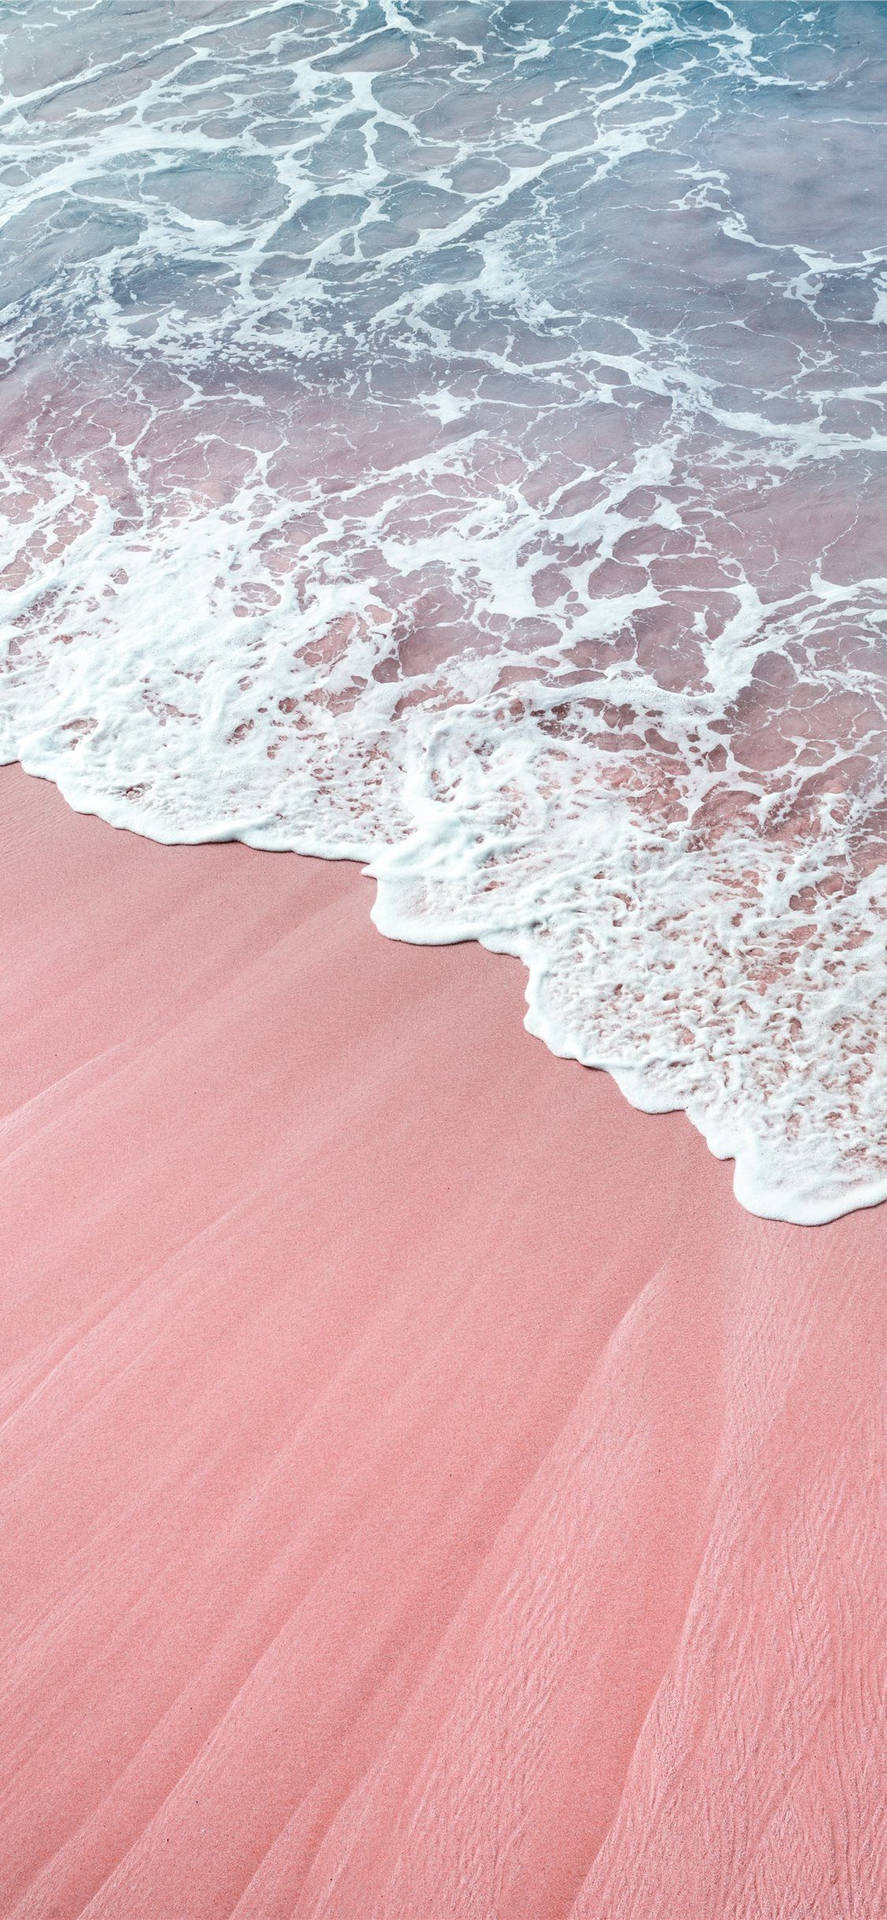 Rose Gold Ipad Beach With Crystal Water Background